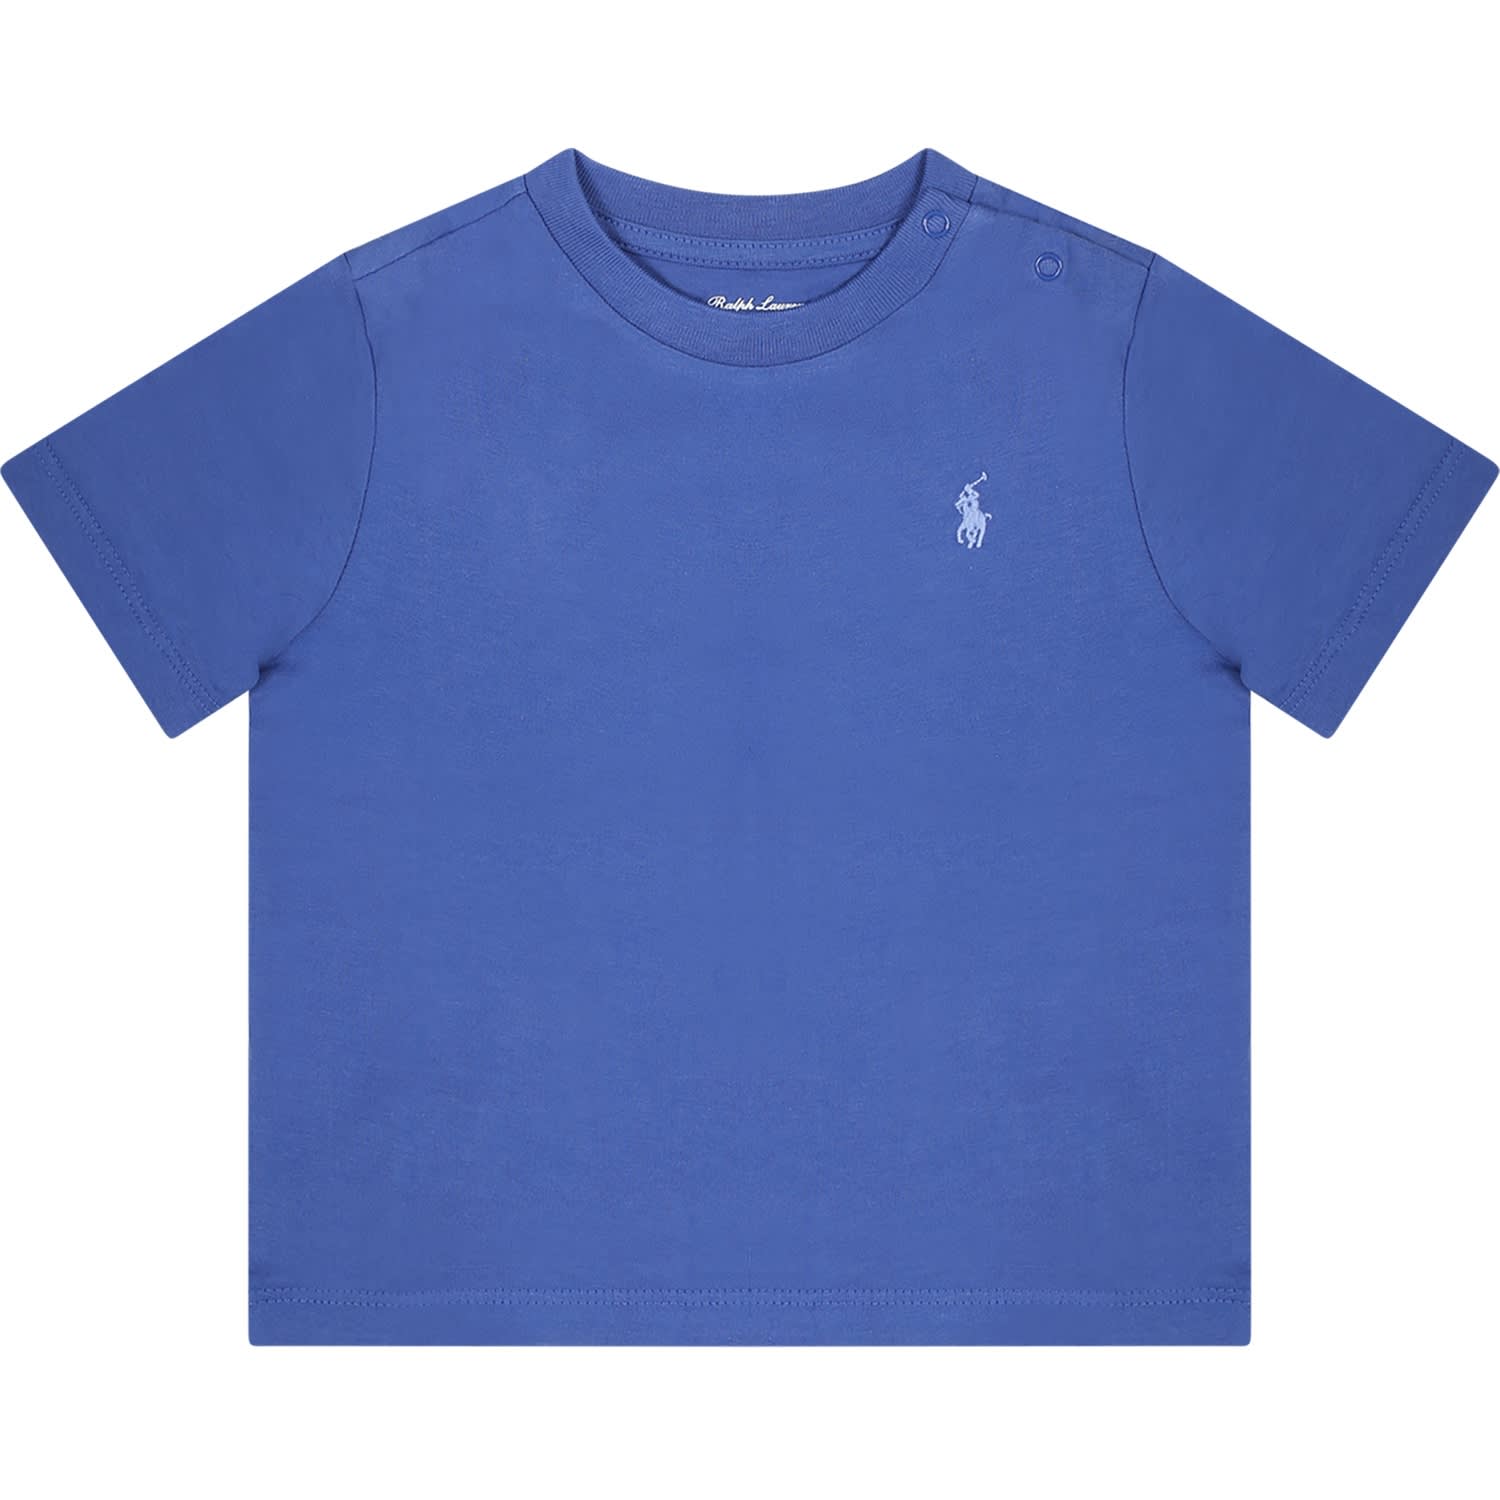 Ralph Lauren Blue T-shirt For Baby Boy With Pony